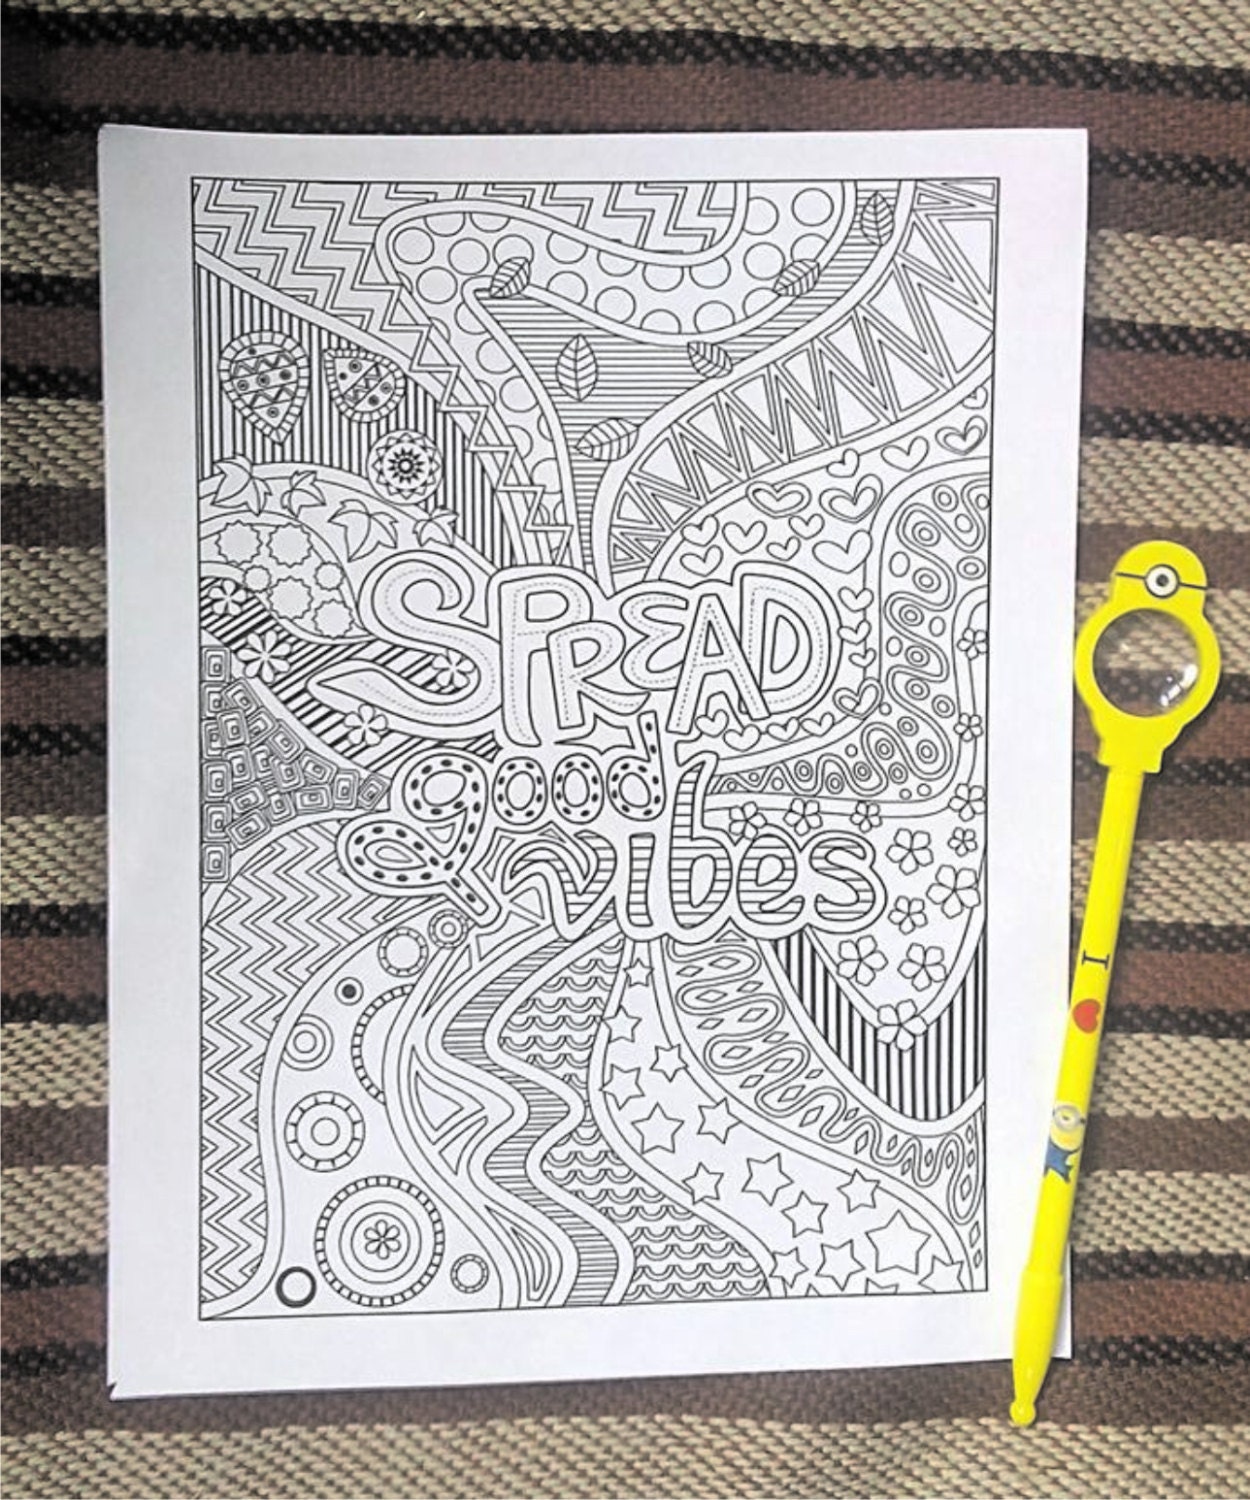 Printable Spread Good Vibes Coloring Page for by RicLDPArtworks